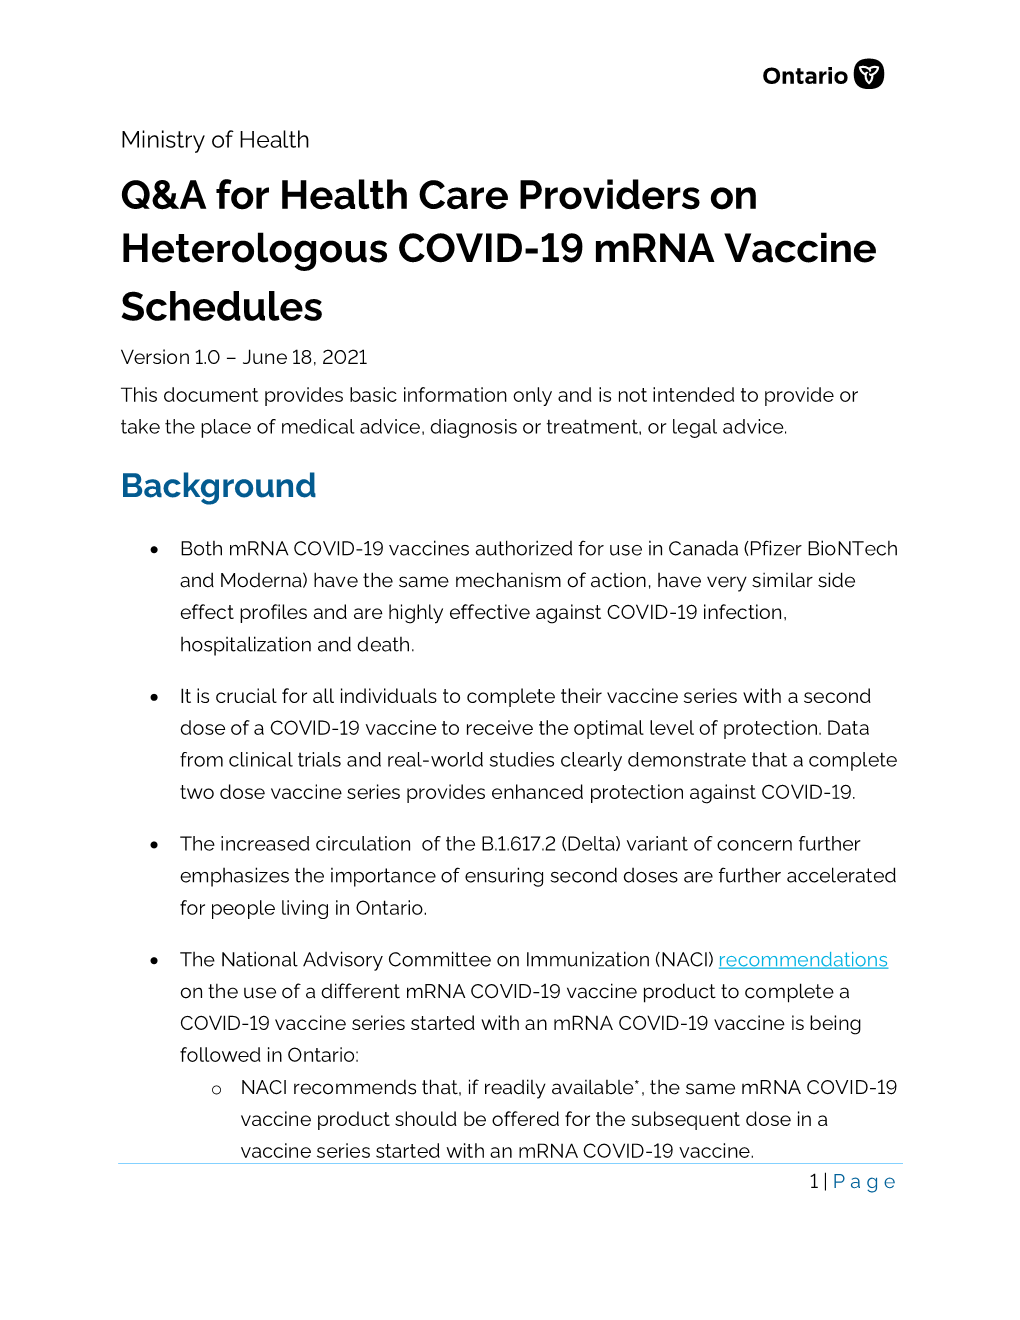 Q&A for Health Care Providers on Heterologous Mrna Vaccine